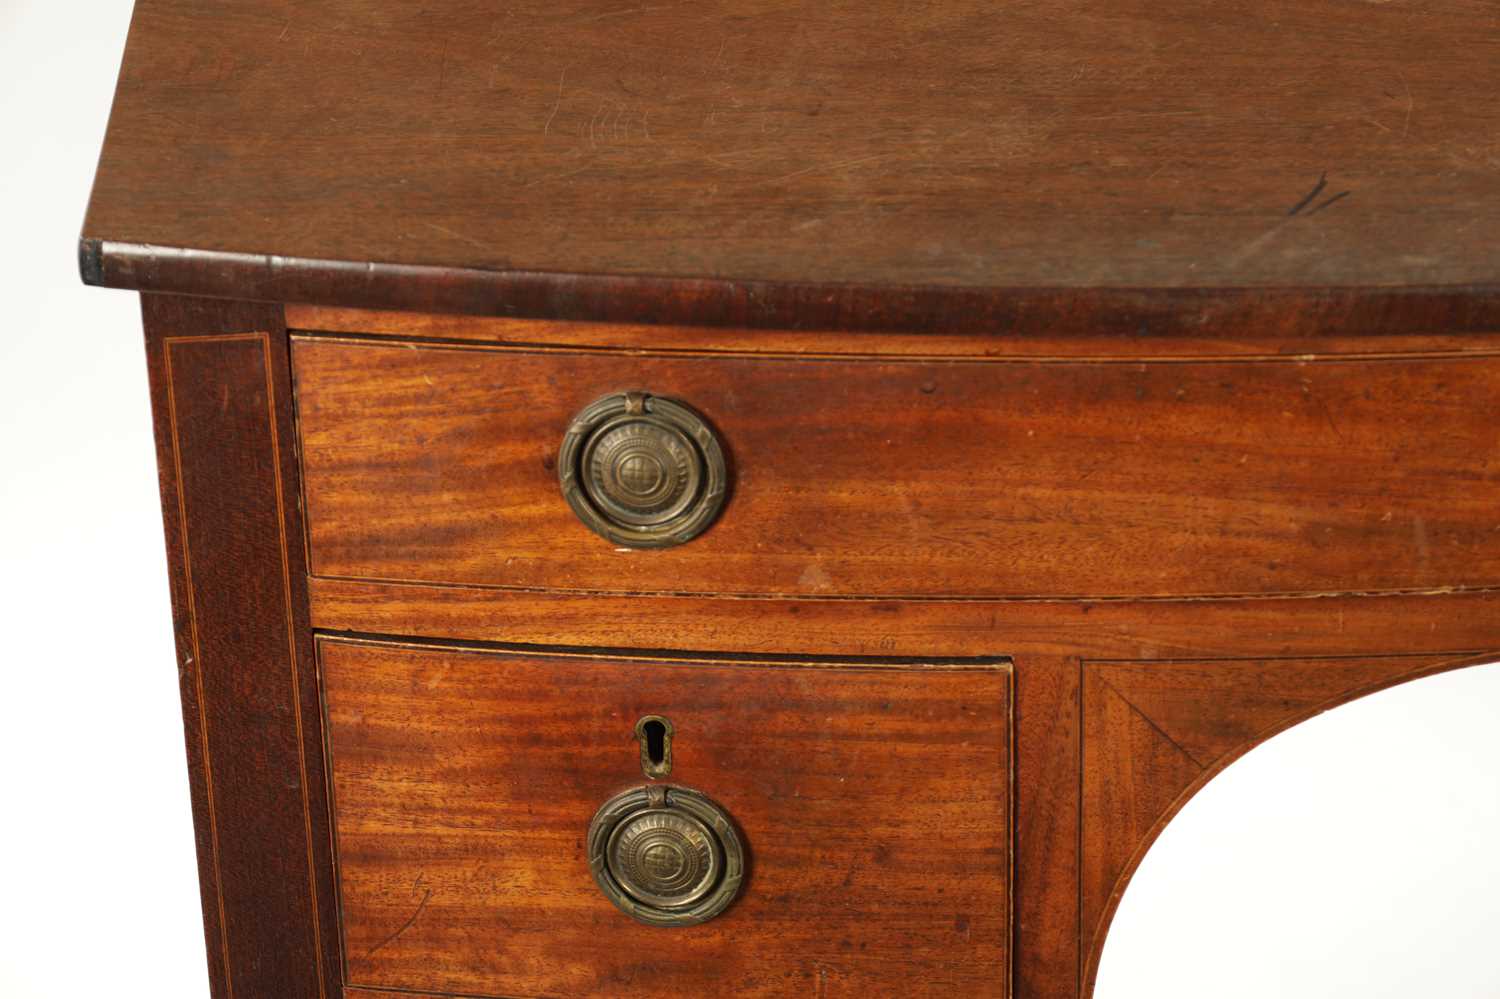 A REGENCY GILLOWS STYLE MAHOGANY BOW FRONTED SIDE TABLE - Image 2 of 5